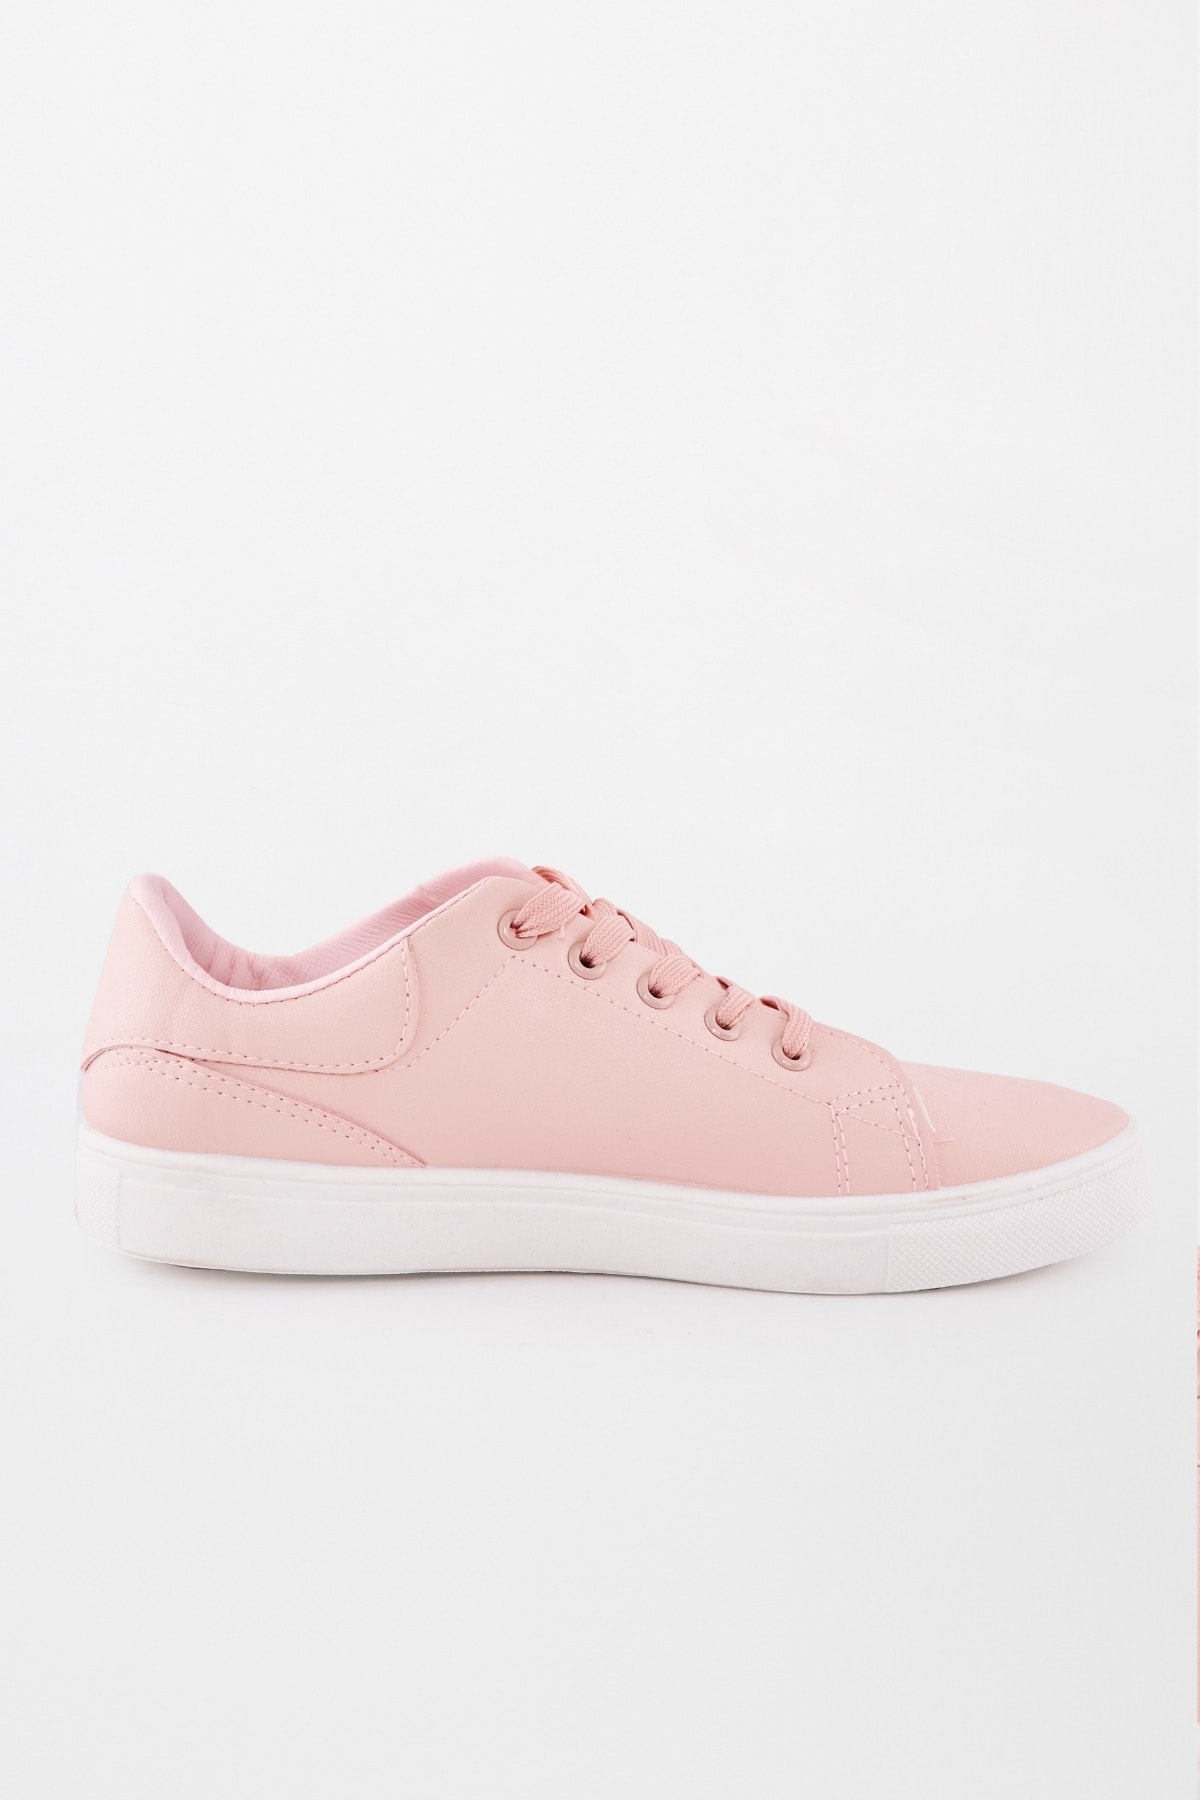 AND | Pink Sneakers